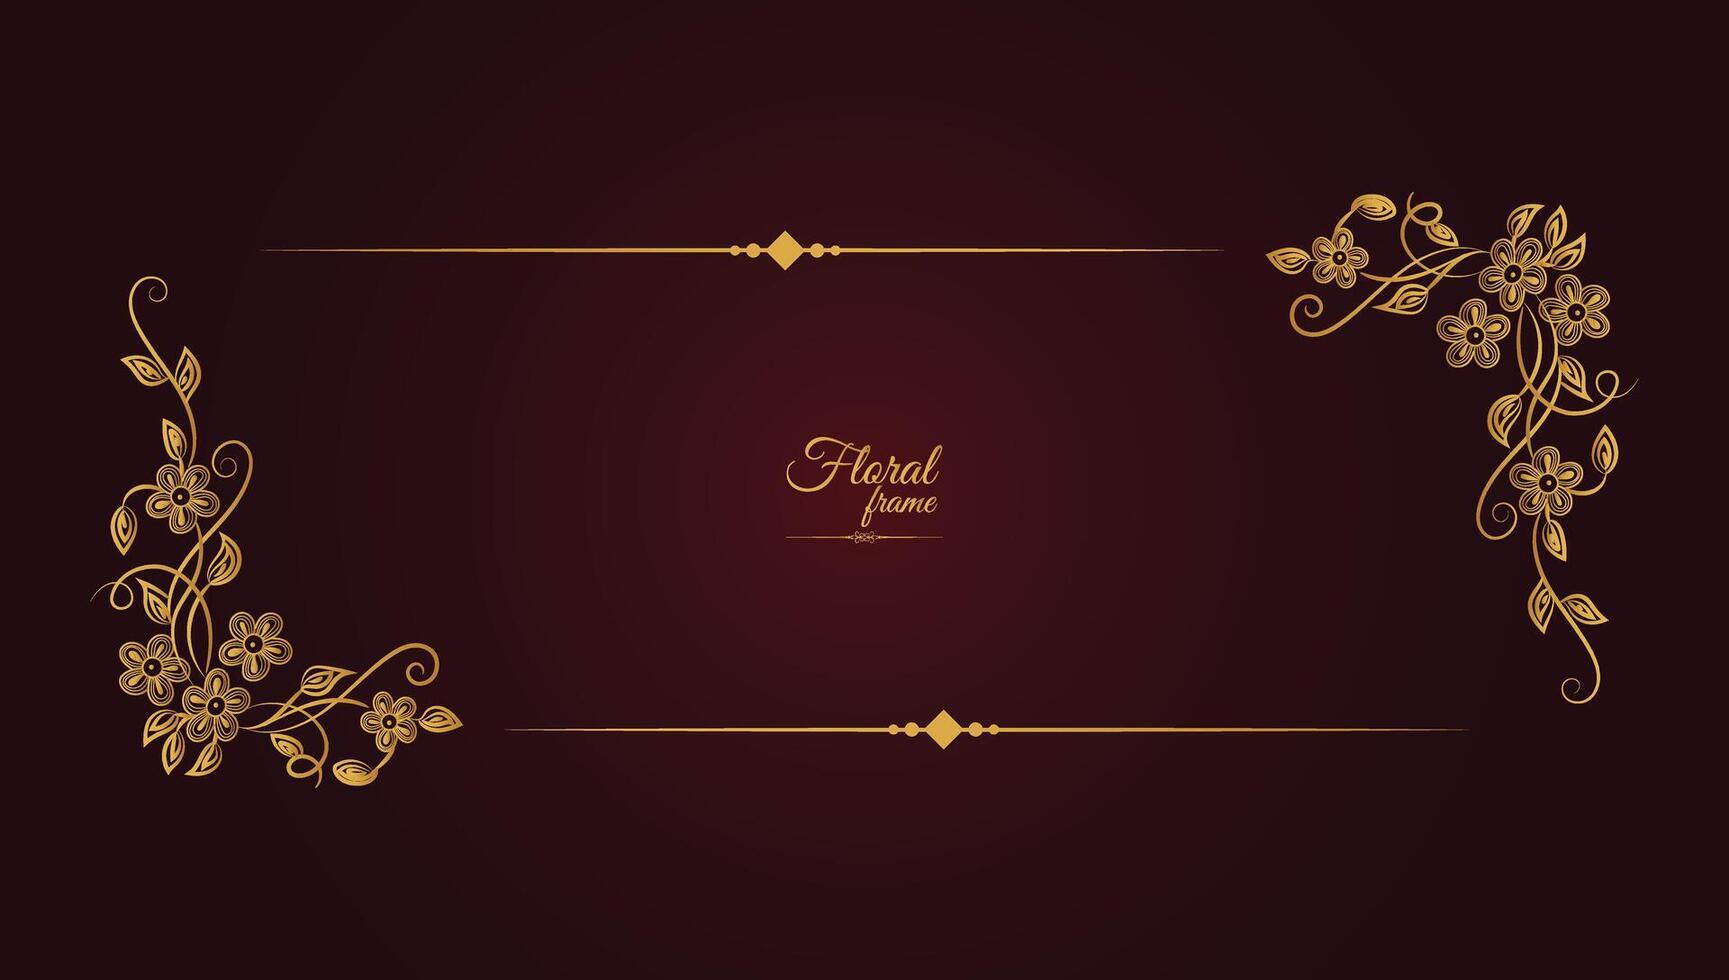 Flower Decorative Gold Frames And Borders vector